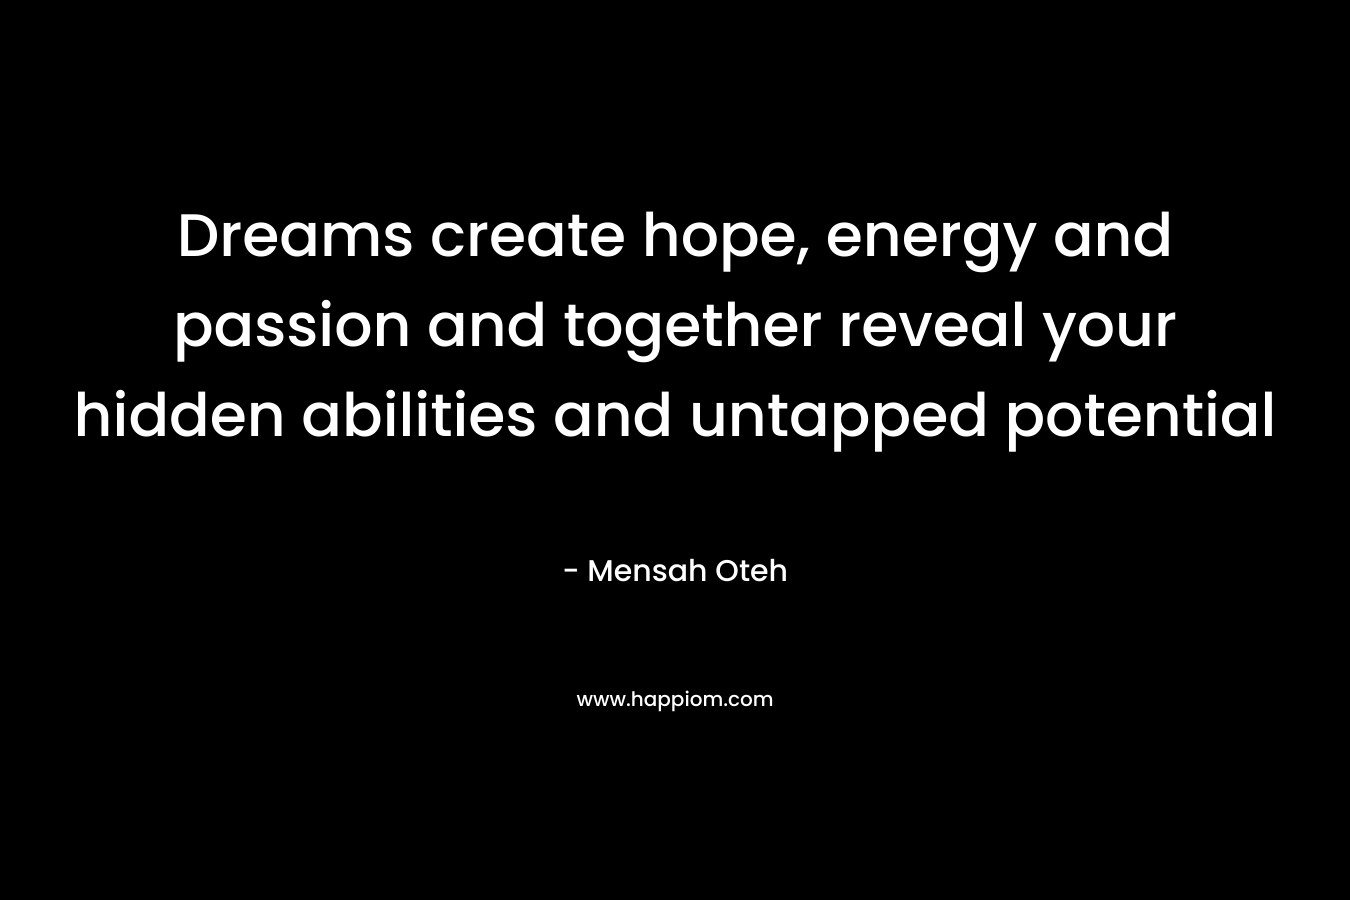 Dreams create hope, energy and passion and together reveal your hidden abilities and untapped potential – Mensah Oteh